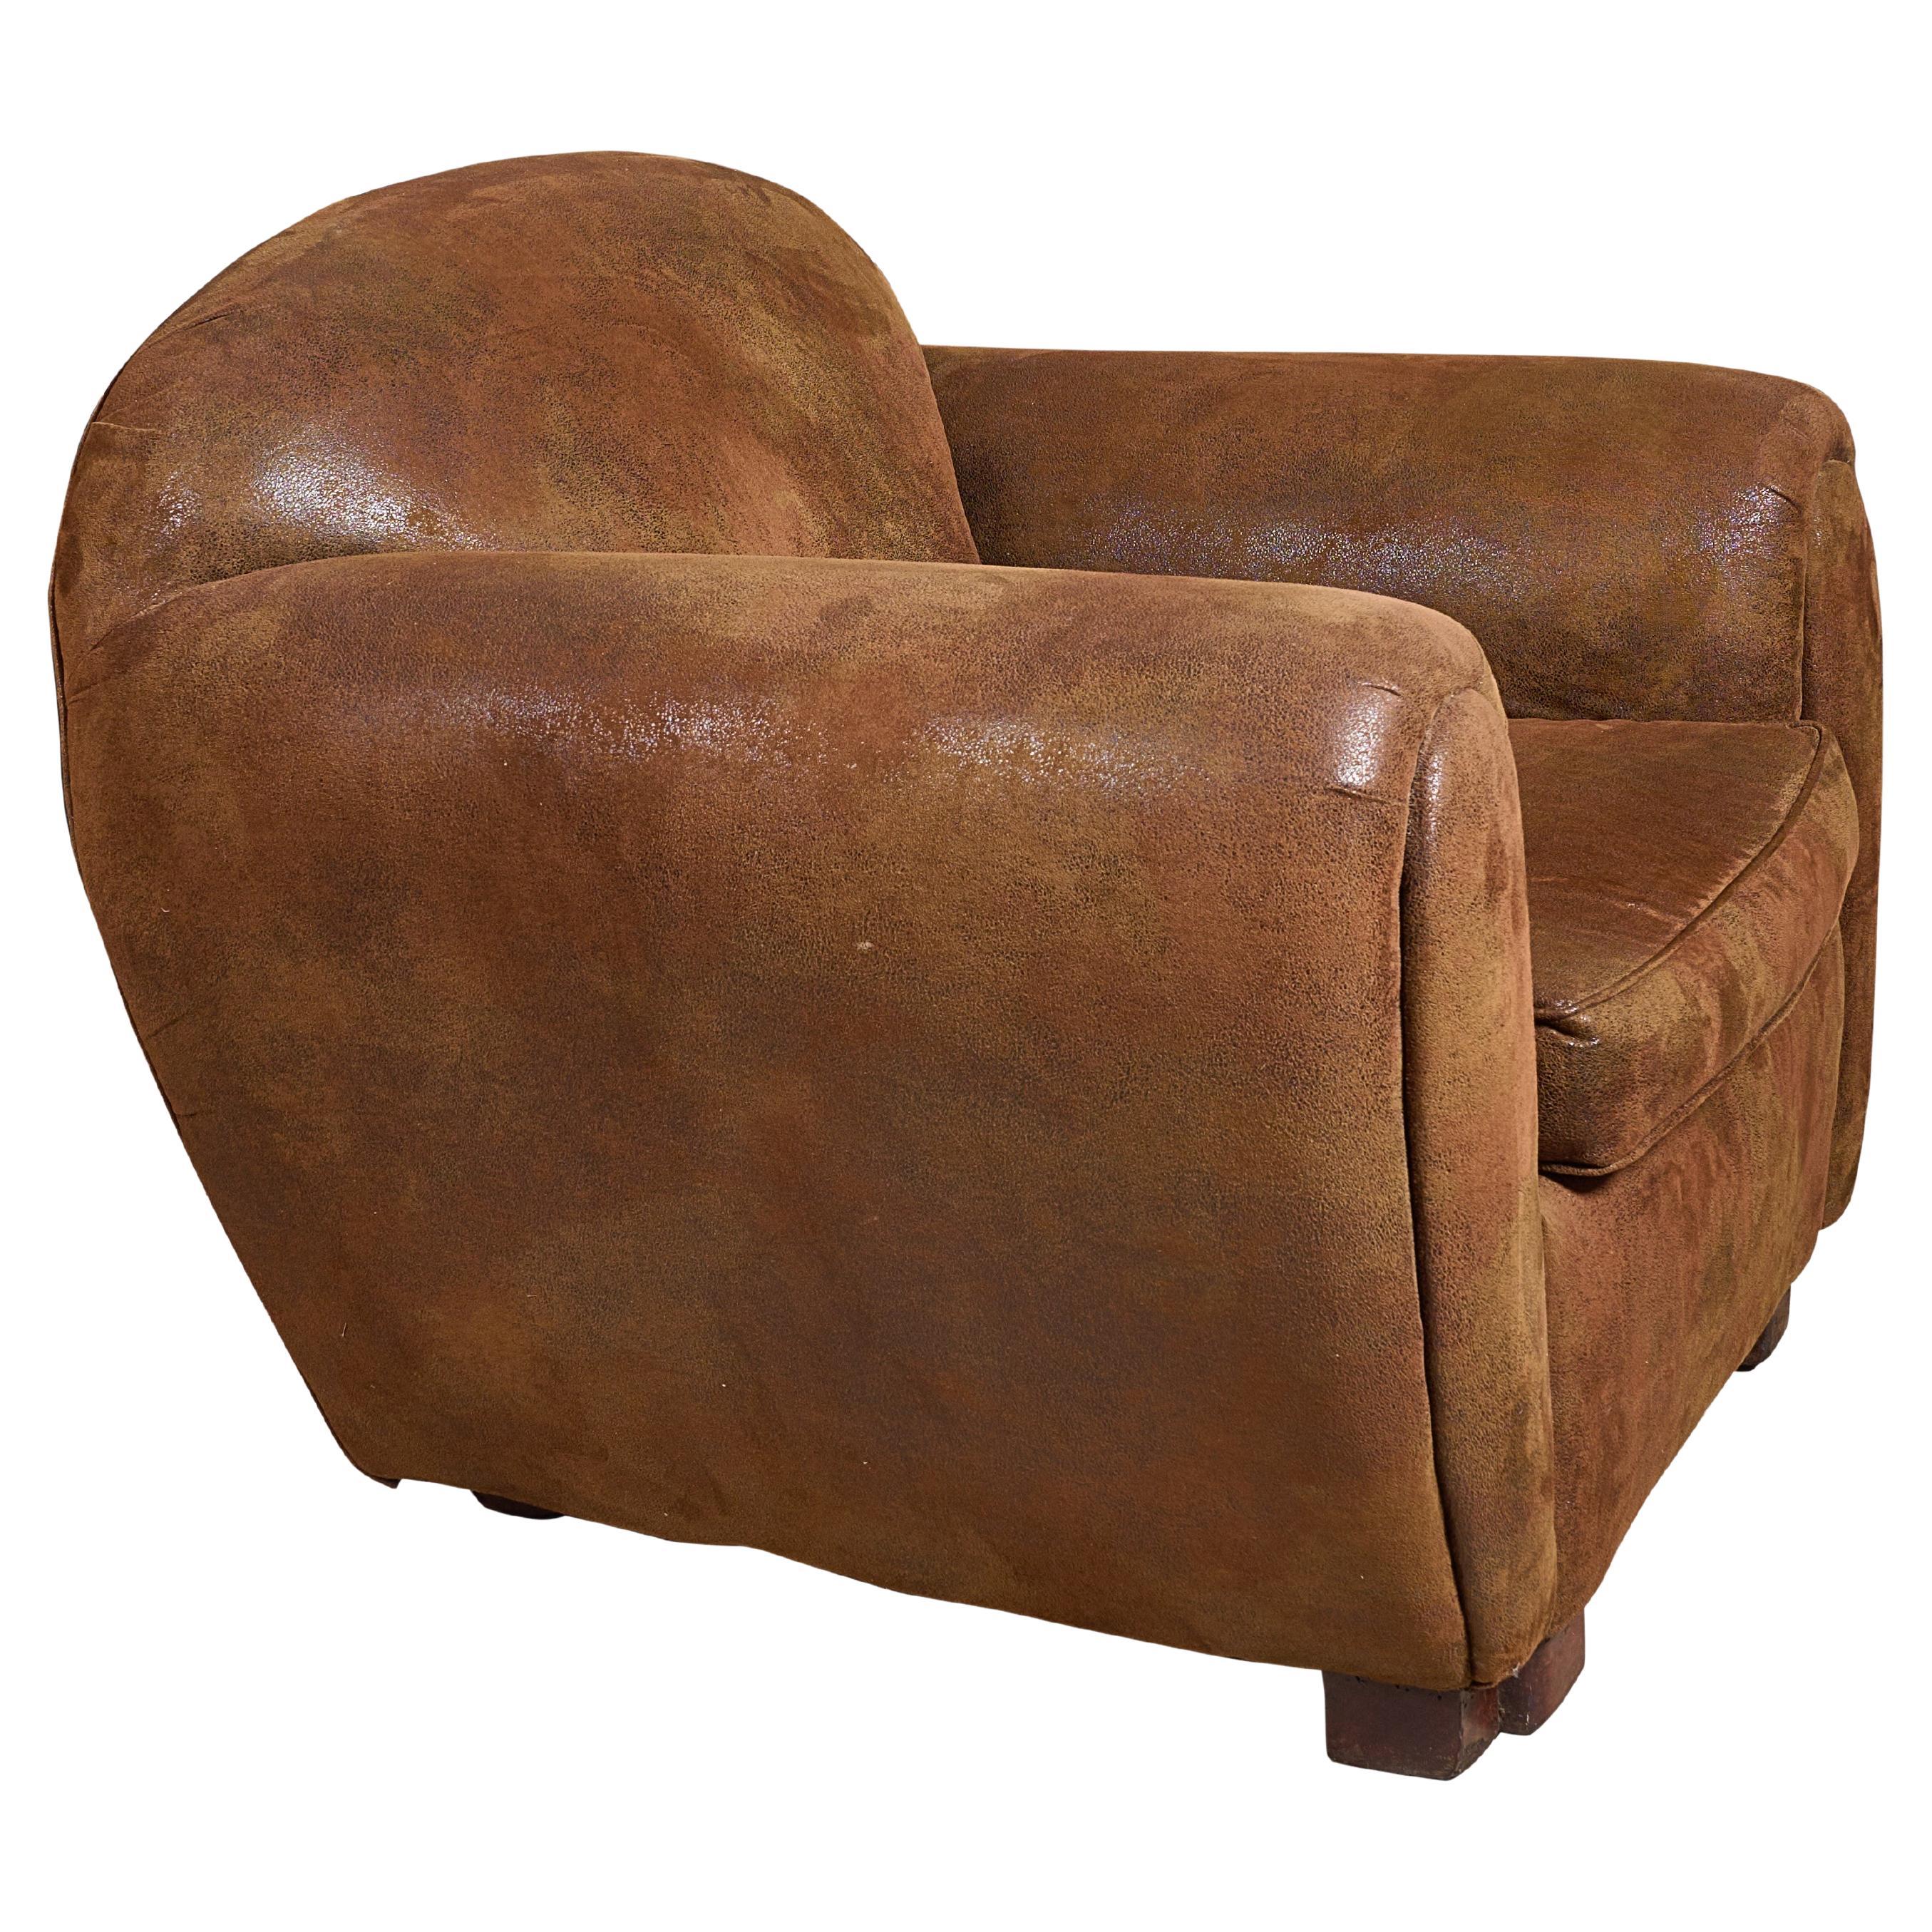 Suede club chair. Great texture and proportions.